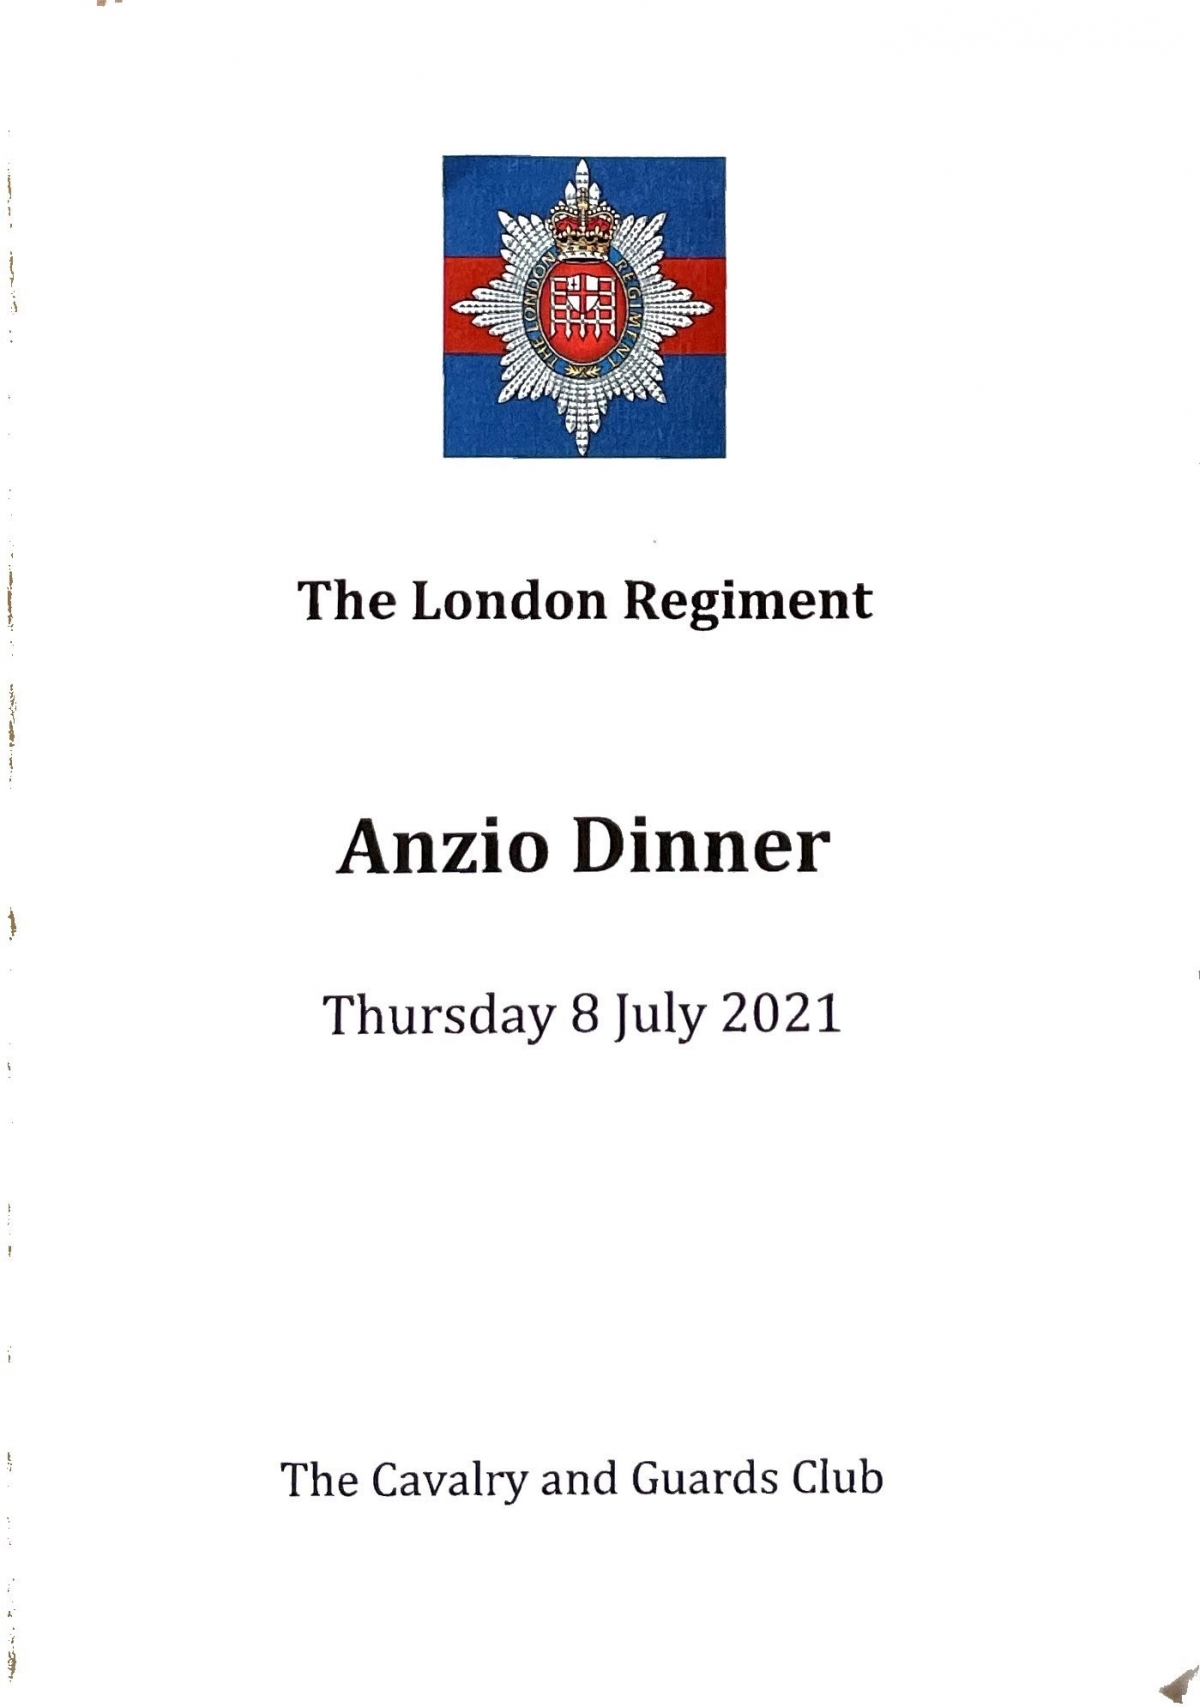 The London Regiment Anzio Dinner The Cavalry and Guards Club